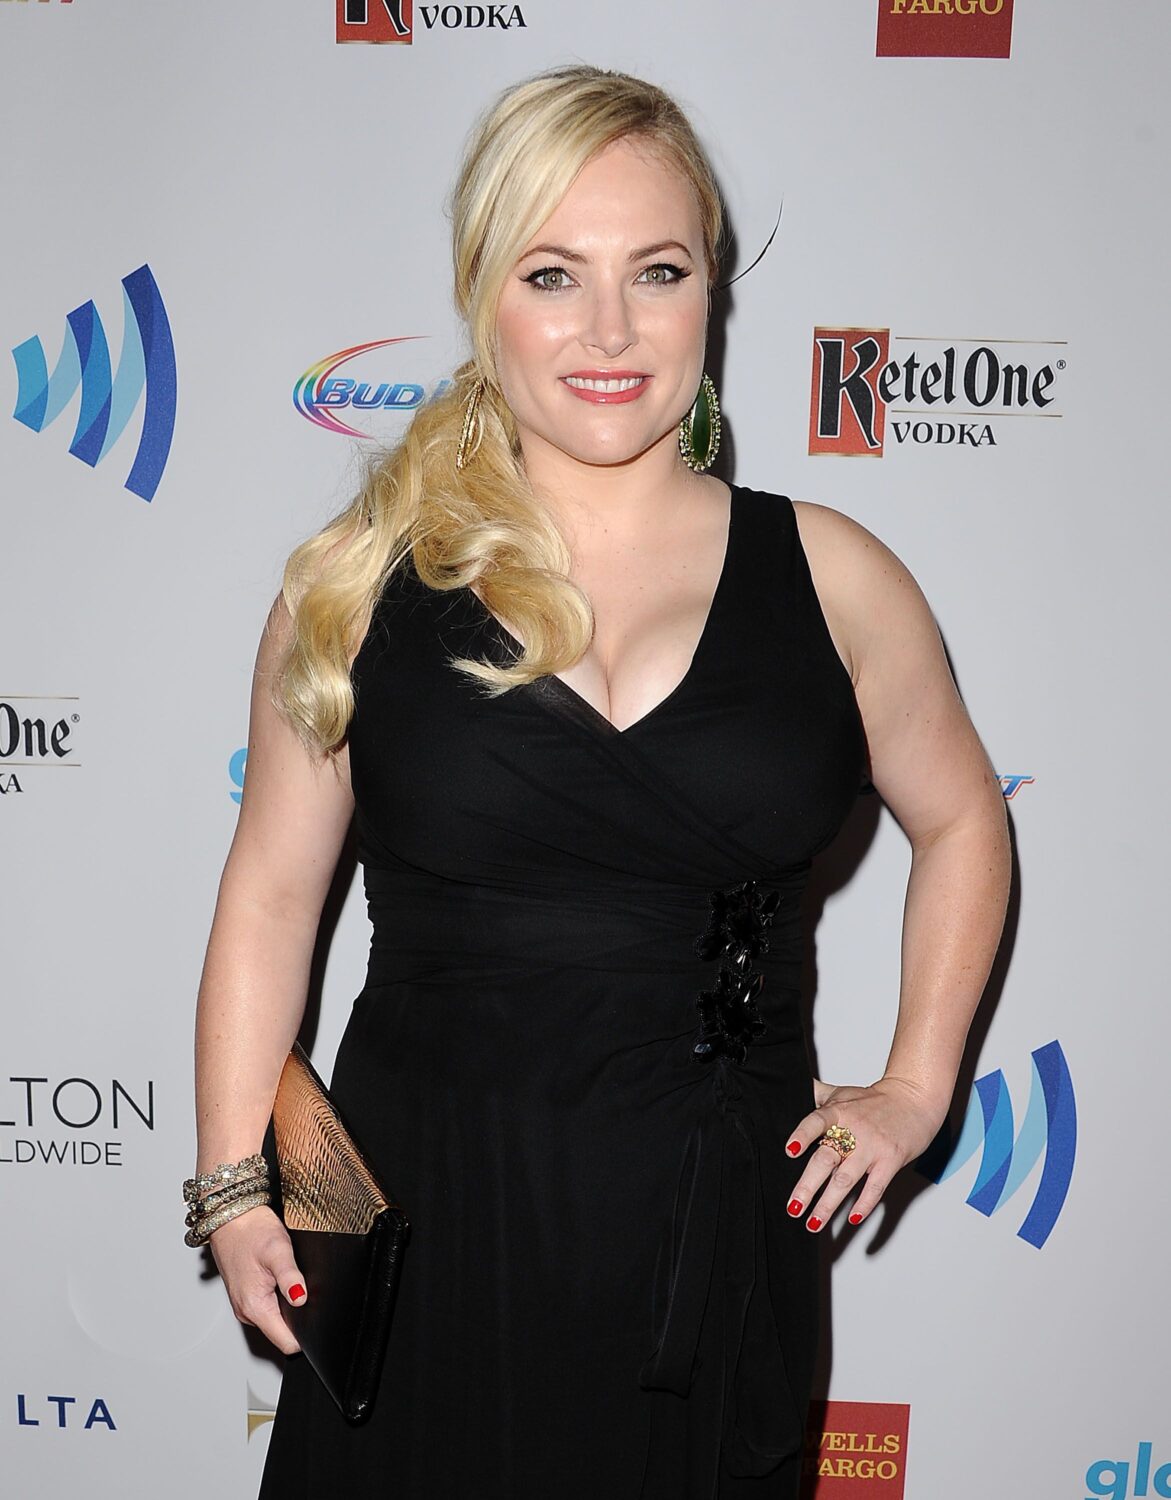 Meghan mccain has thoughts about chrissy teigen's twitter exit that ar...